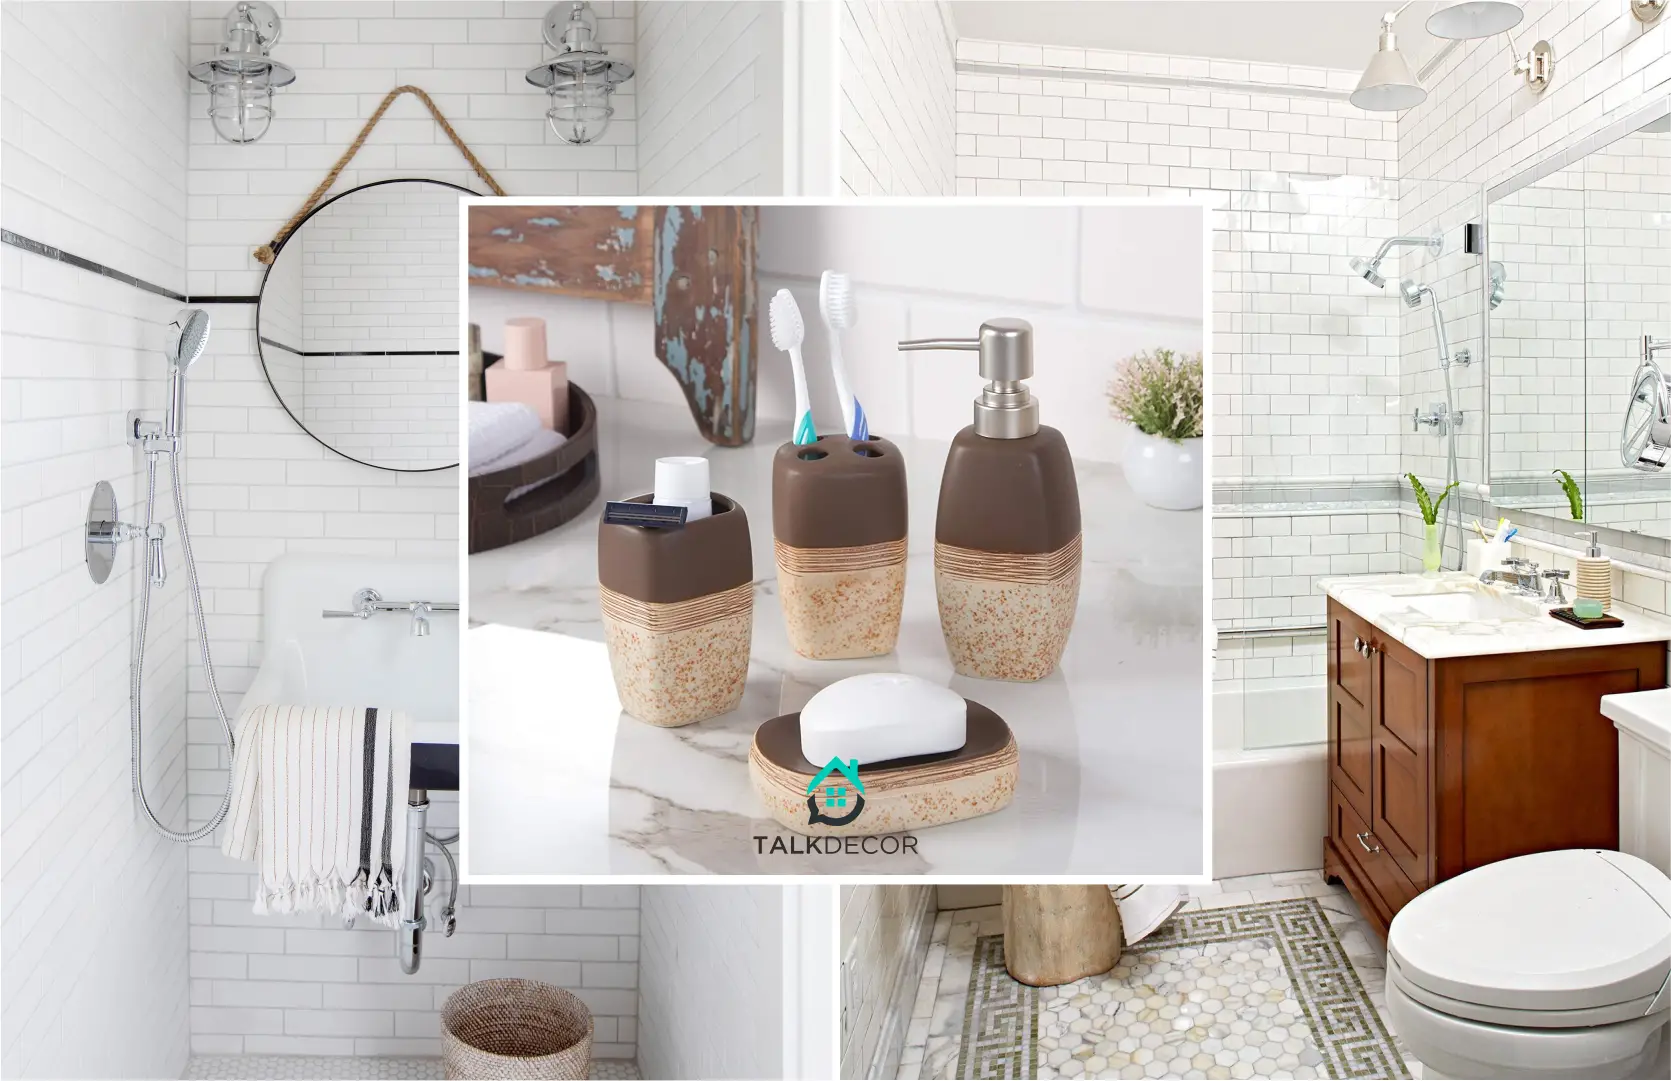 Must-Have Accessories to Add Function and Style to Your Bathroom